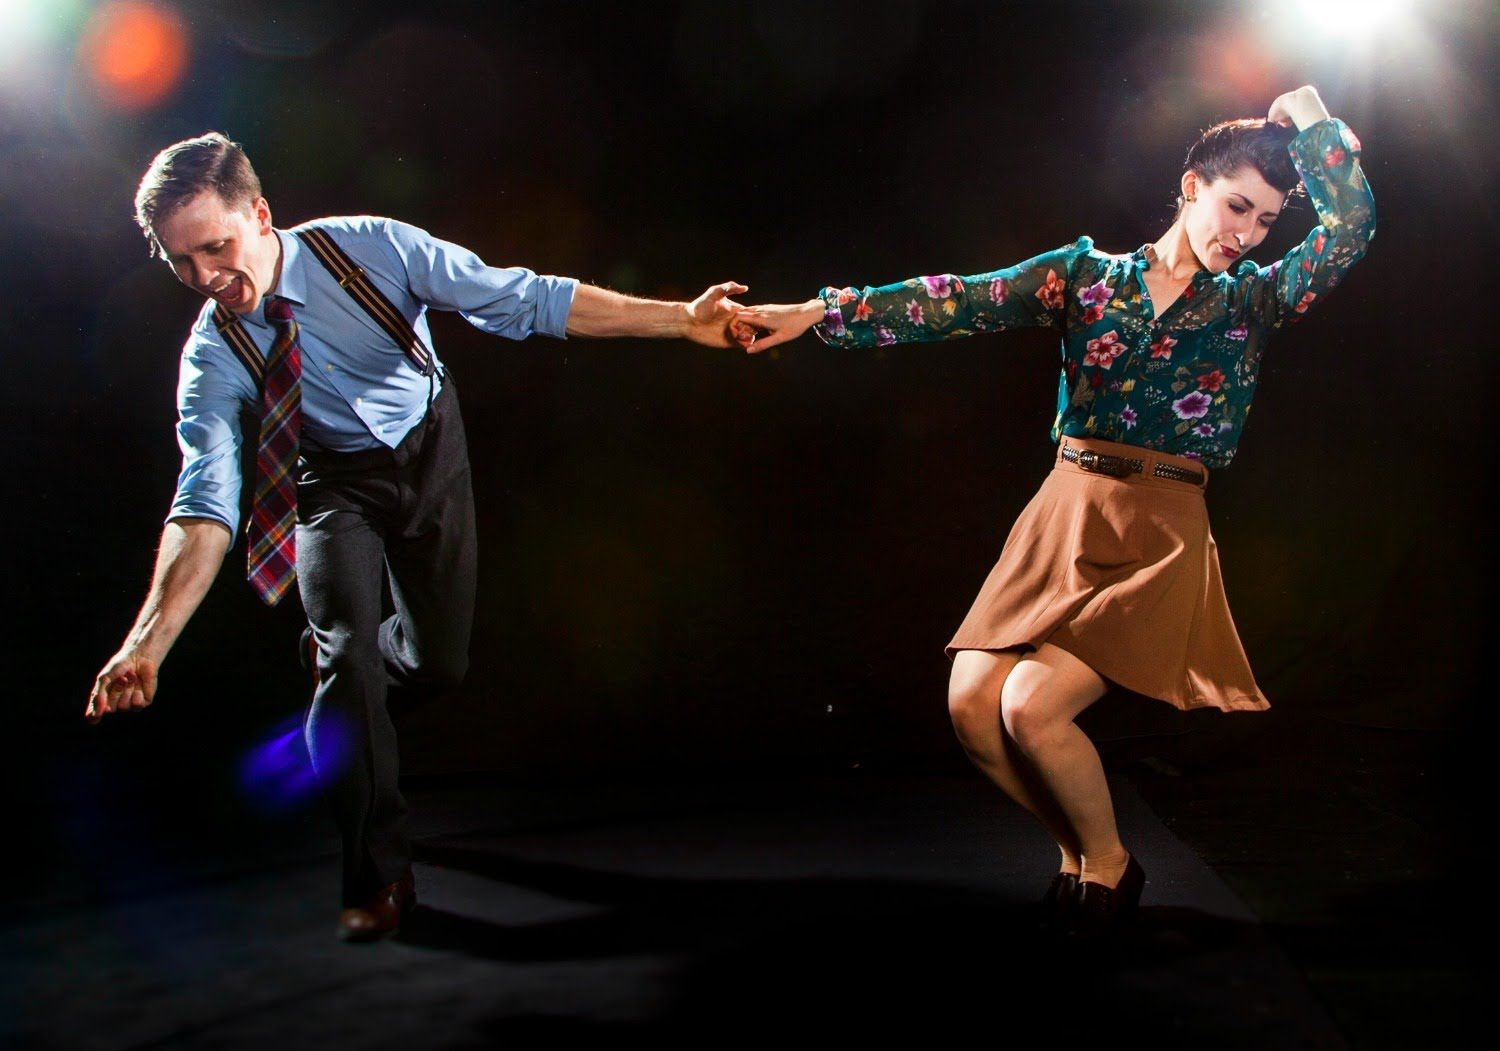 Is Dancing a Sport? Learn About the Different Types of Dance